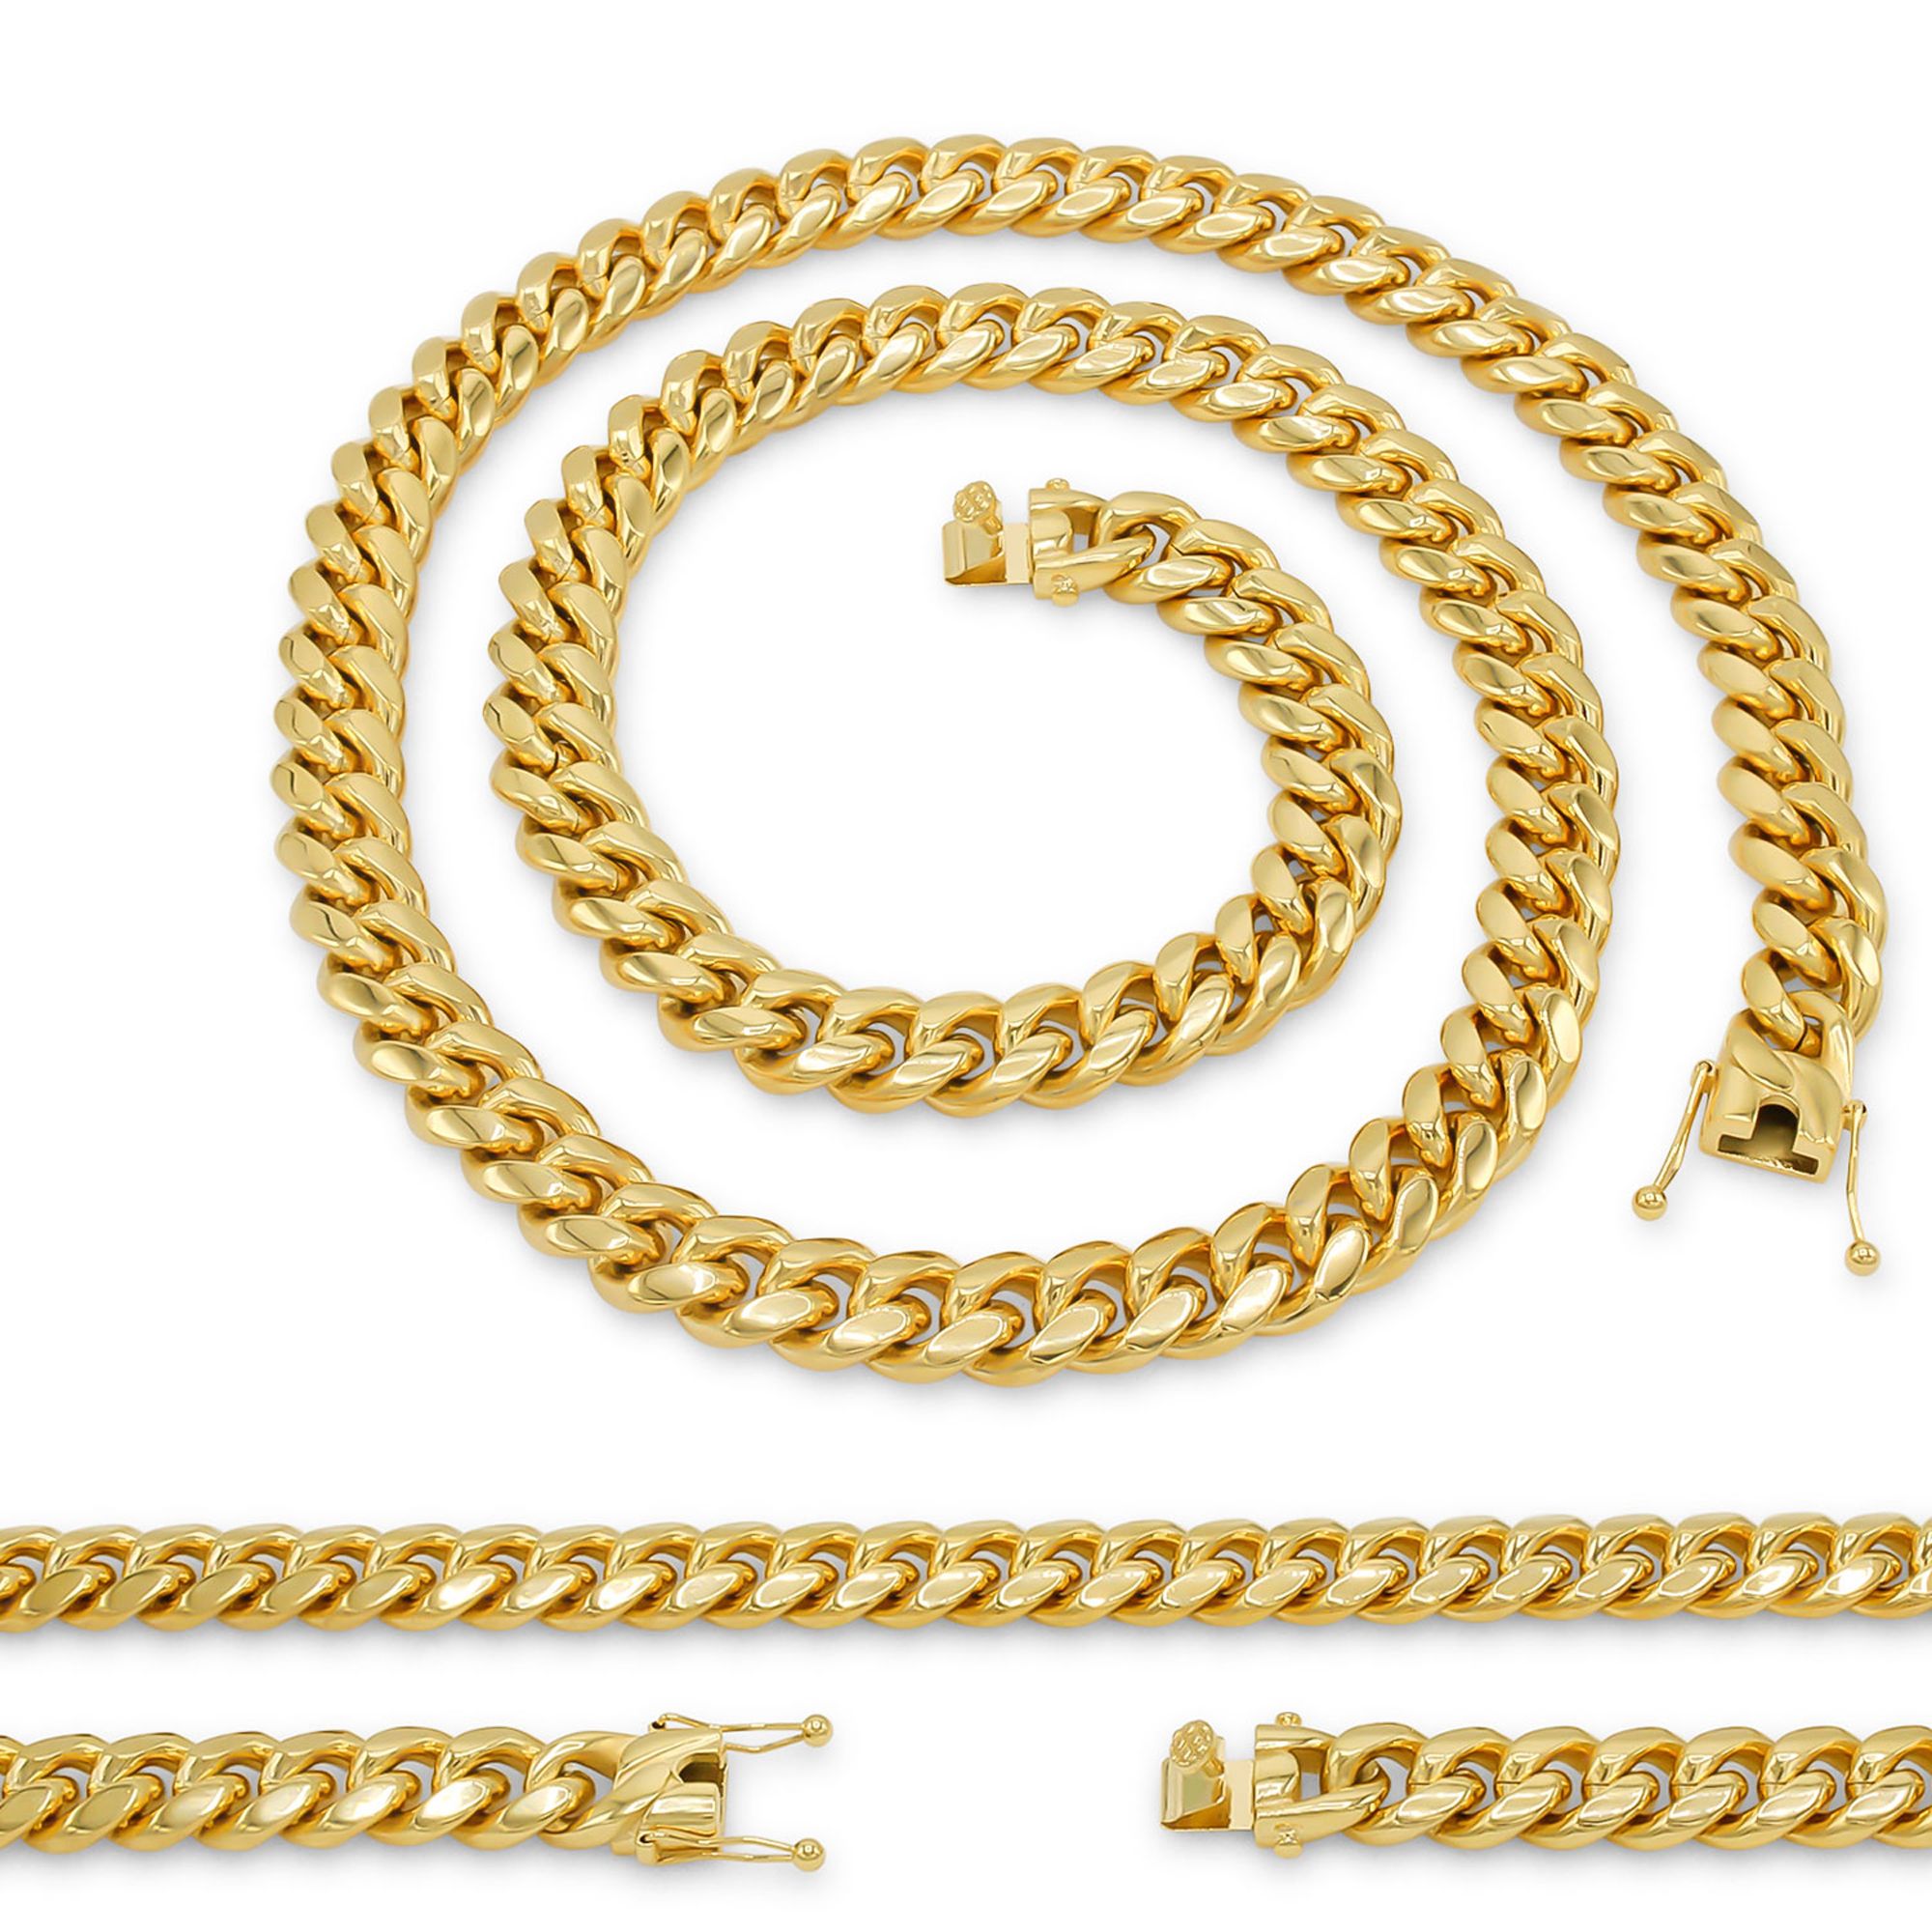 Thick Curb Chain for Mask Gold Brass Mask Chain Cuban Link Gold Curb Chain Gold Mask Chain Curb Mask Chain Mask Jewelry